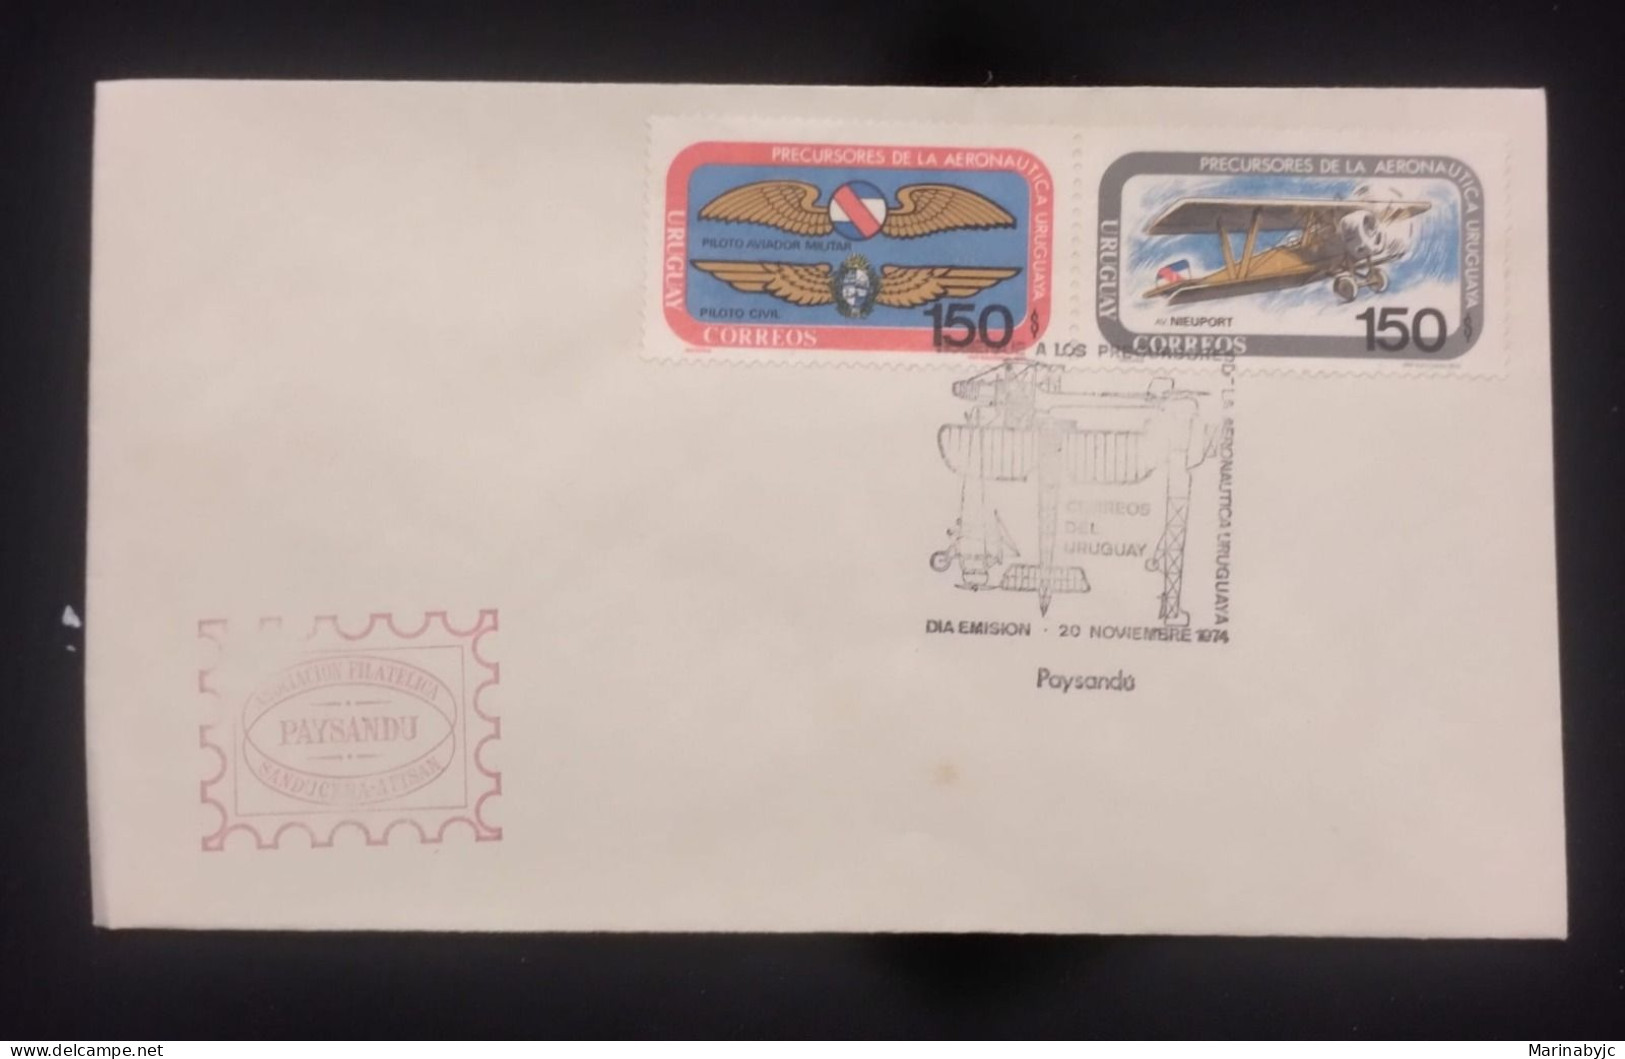 D)1974, URUGUAY, FIRST DAY COVER, ISSUE, HISTORY OF AVIATION, EMBLEMS, NIEUPORT BIPLANE, FDC - Uruguay